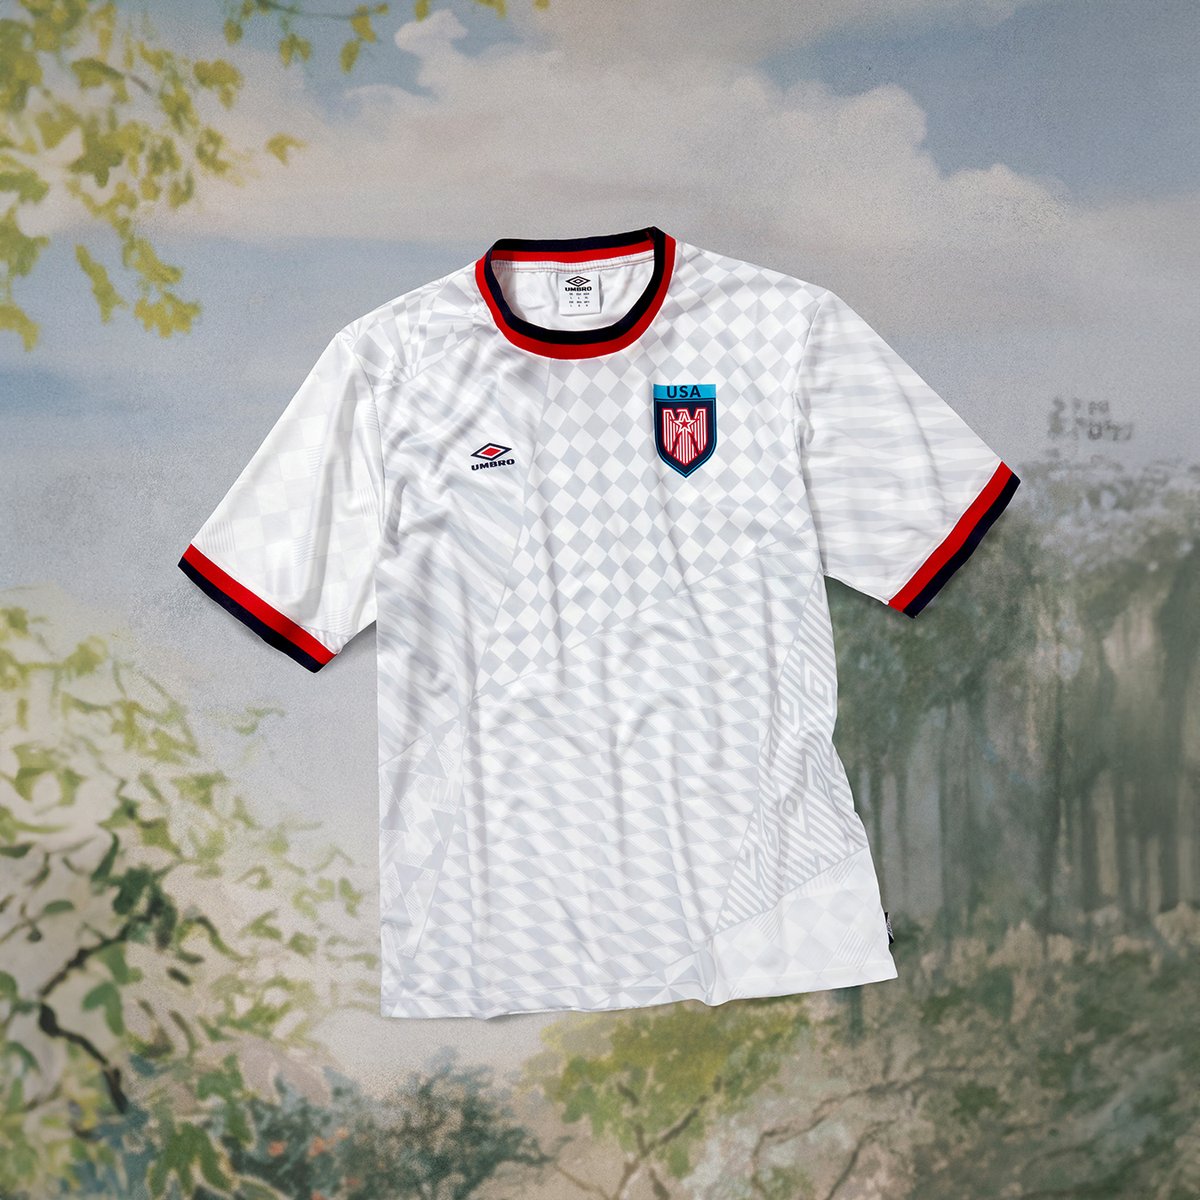 This is the new “United States [of America]” (USA) shirt from Part 2 of the “United by Umbro” collection. Read more: footballshirtculture.com/lifestyle/unit… #UnitedStates #USSoccer #umbro #footballshirts #soccerjersey #newkits